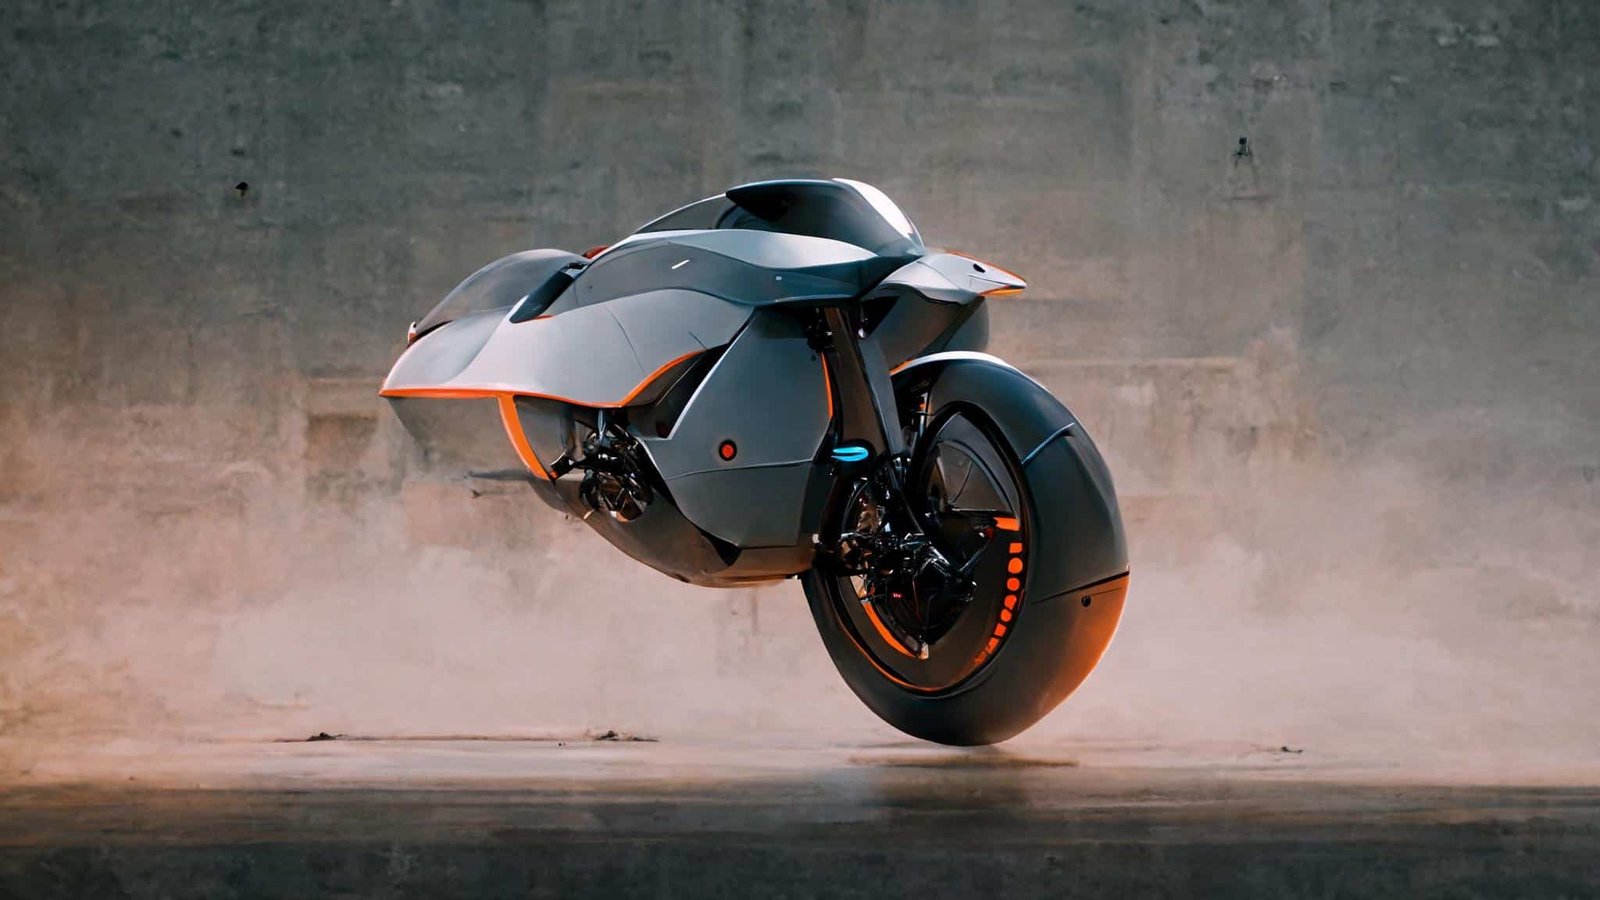 venema_A_future_inspired_flying_motorcycle_in_front_of_a_concre_9a69c876-2065-429f-aa96-8da073603af3